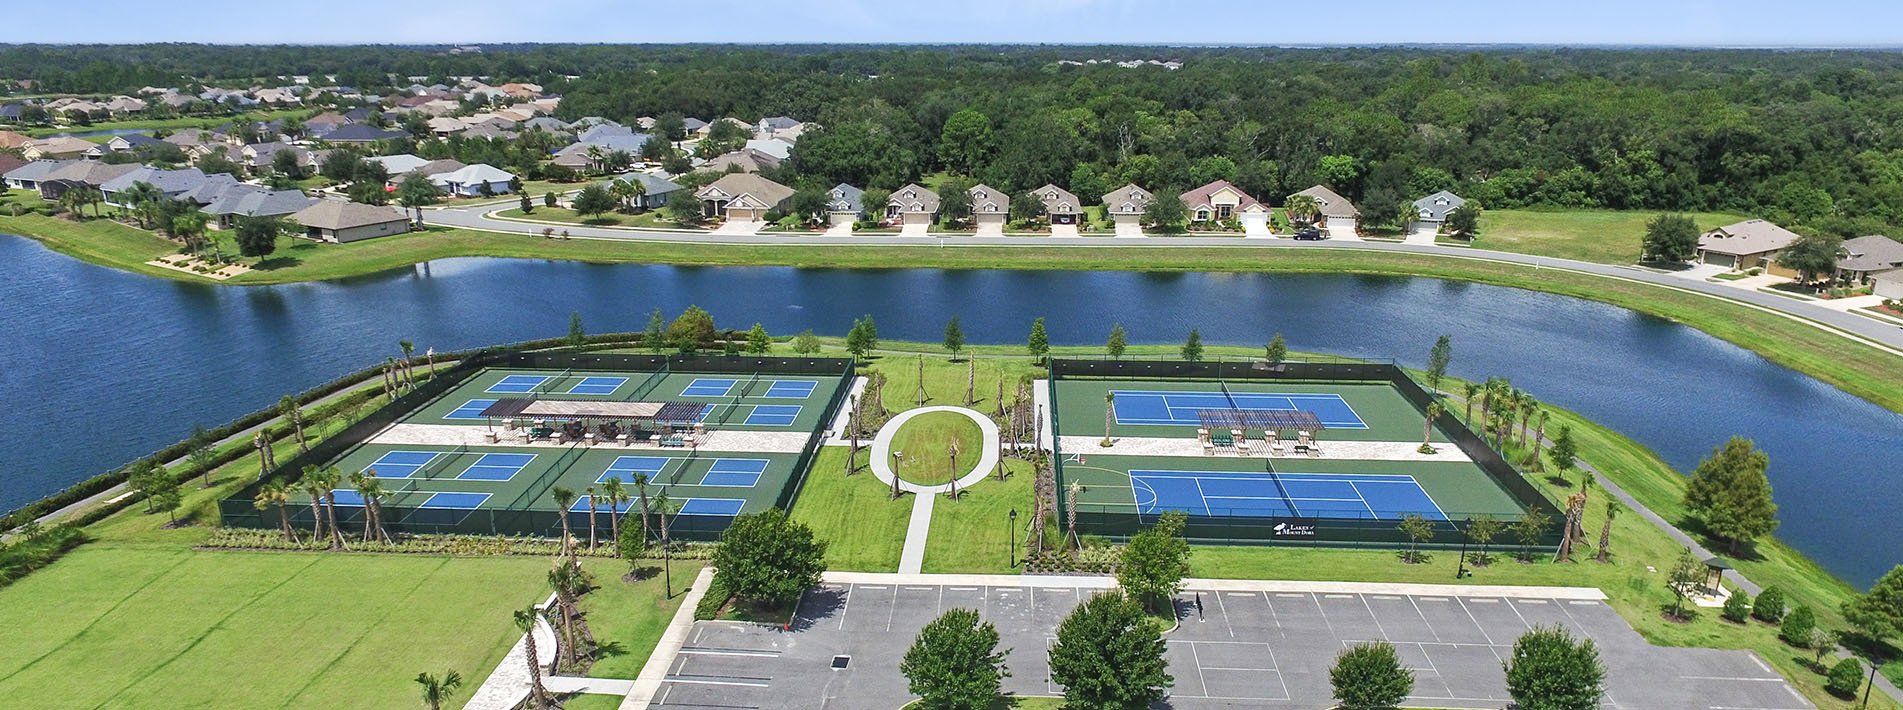 Lakes of Mount Dora - 55 Plus Active Adult Sports Courts - Central Florida